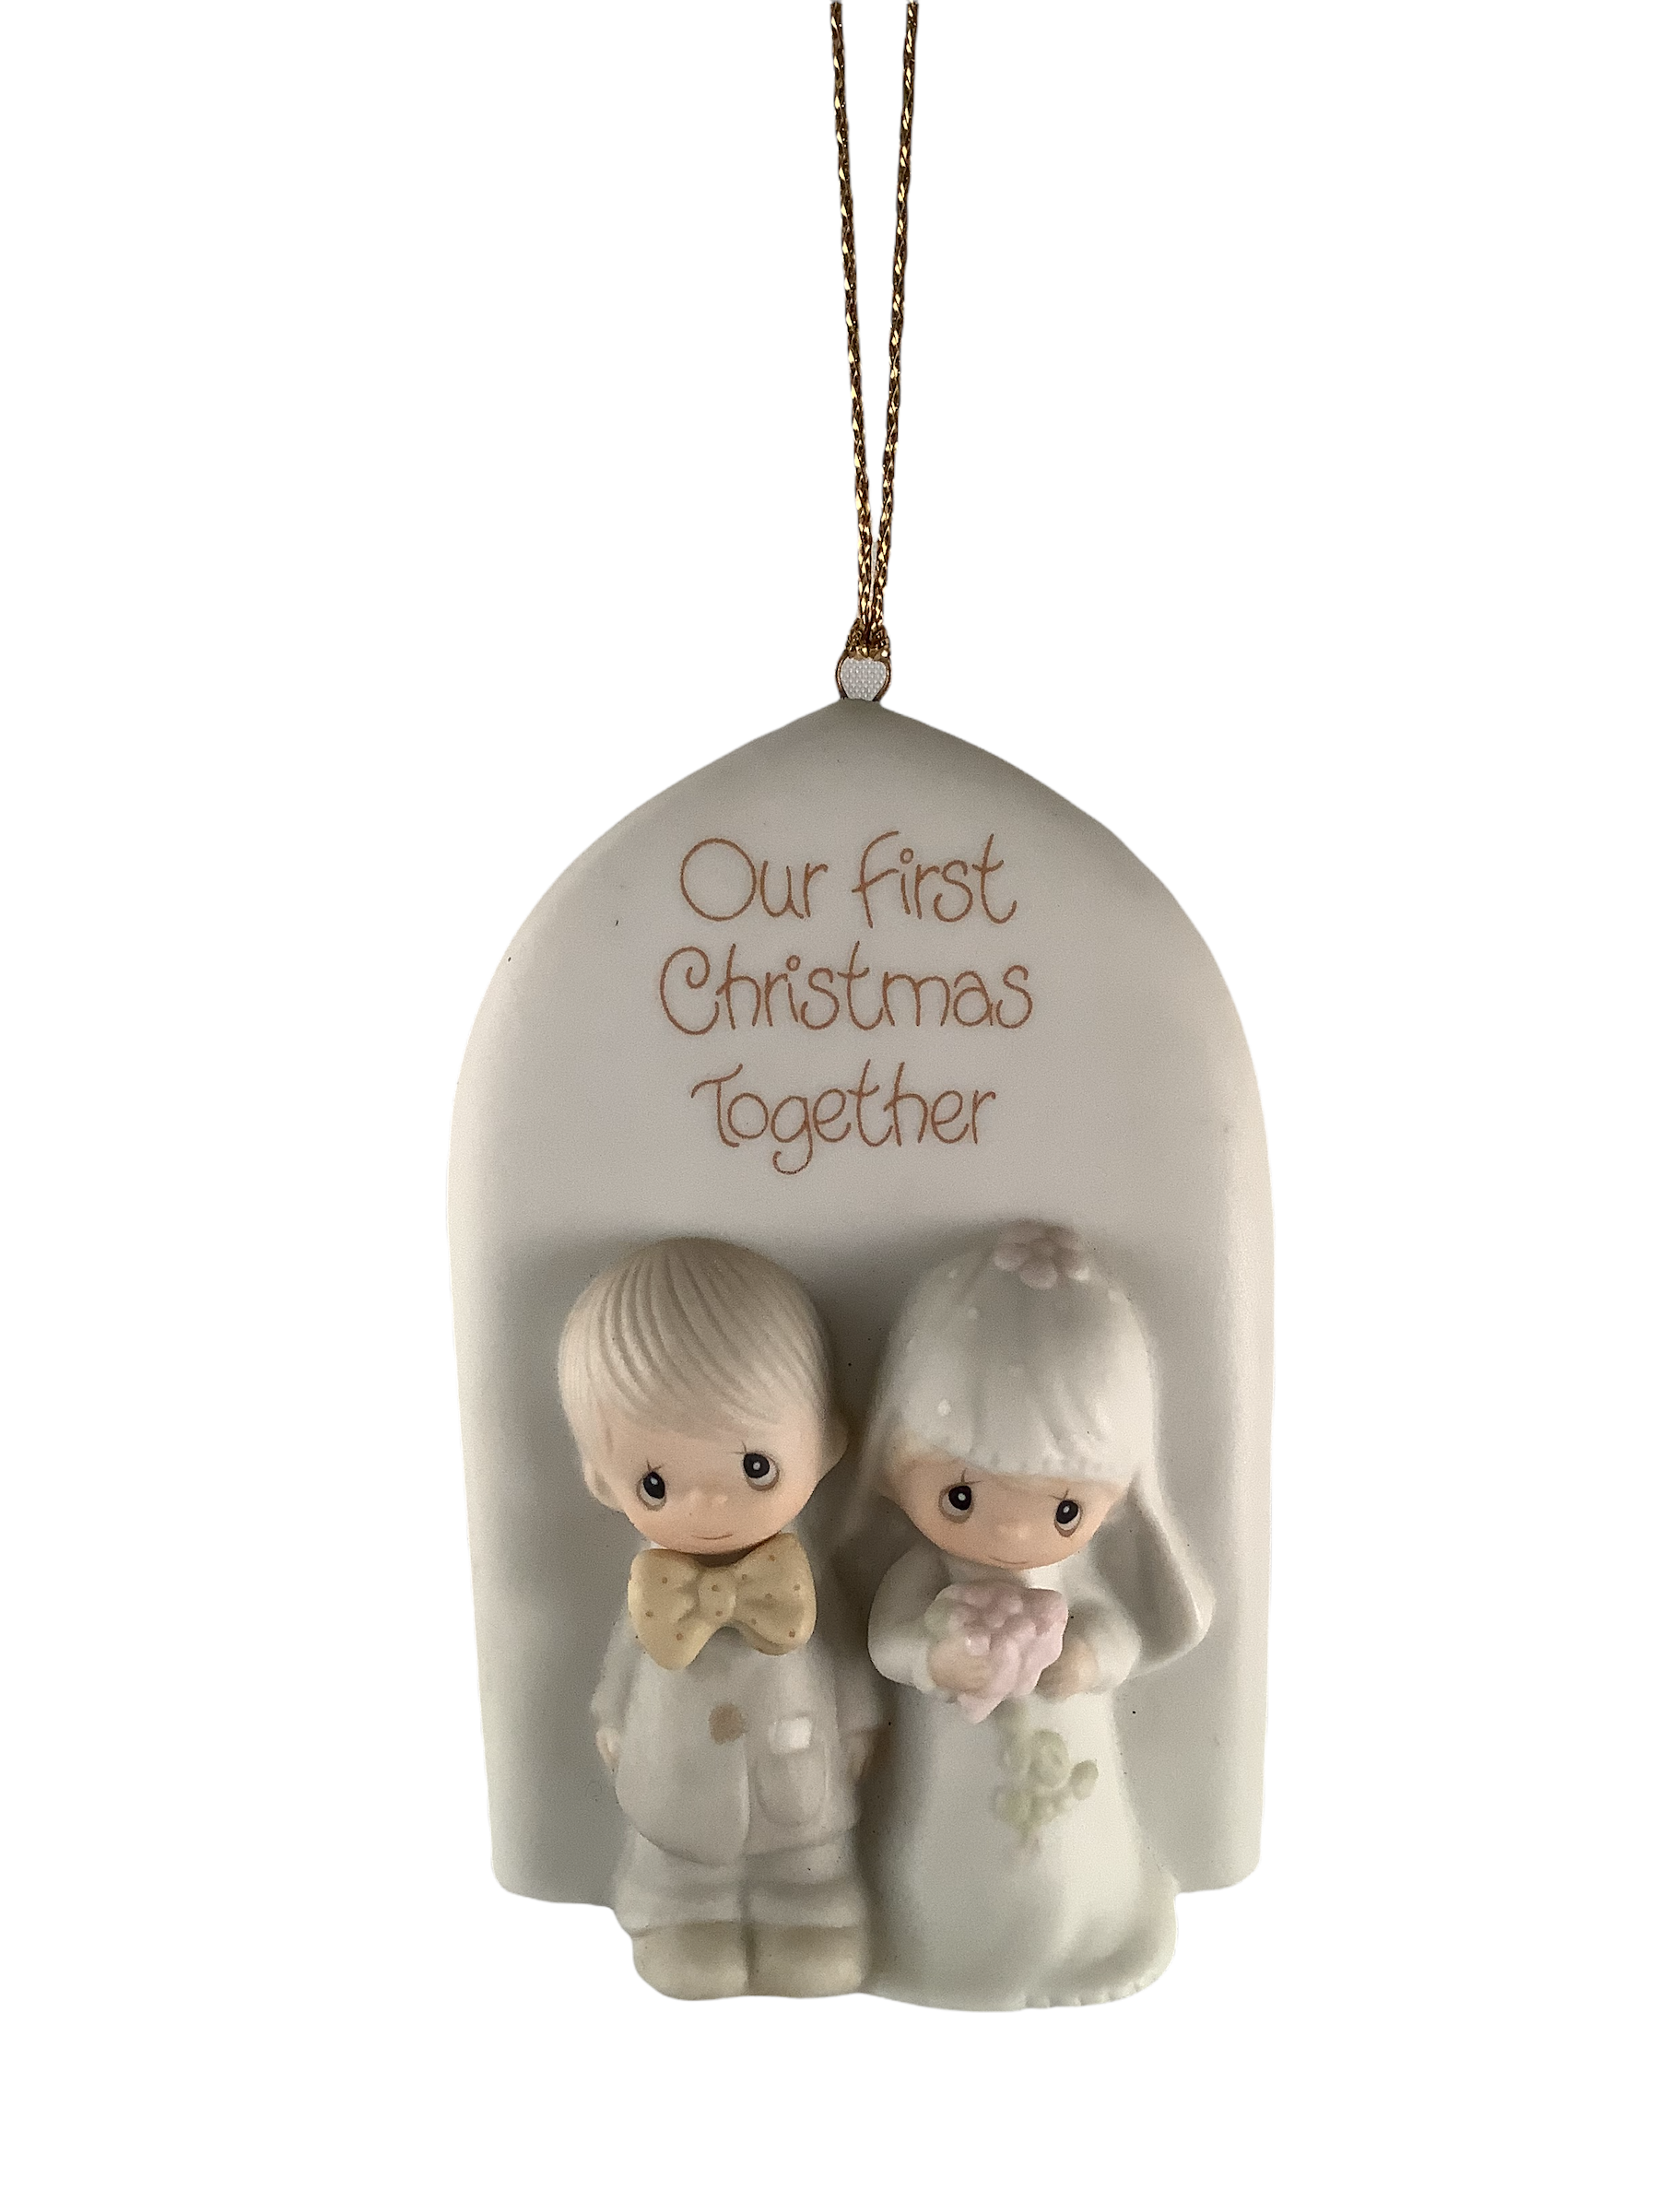 Our First Christmas Together - Precious Moment Ornament